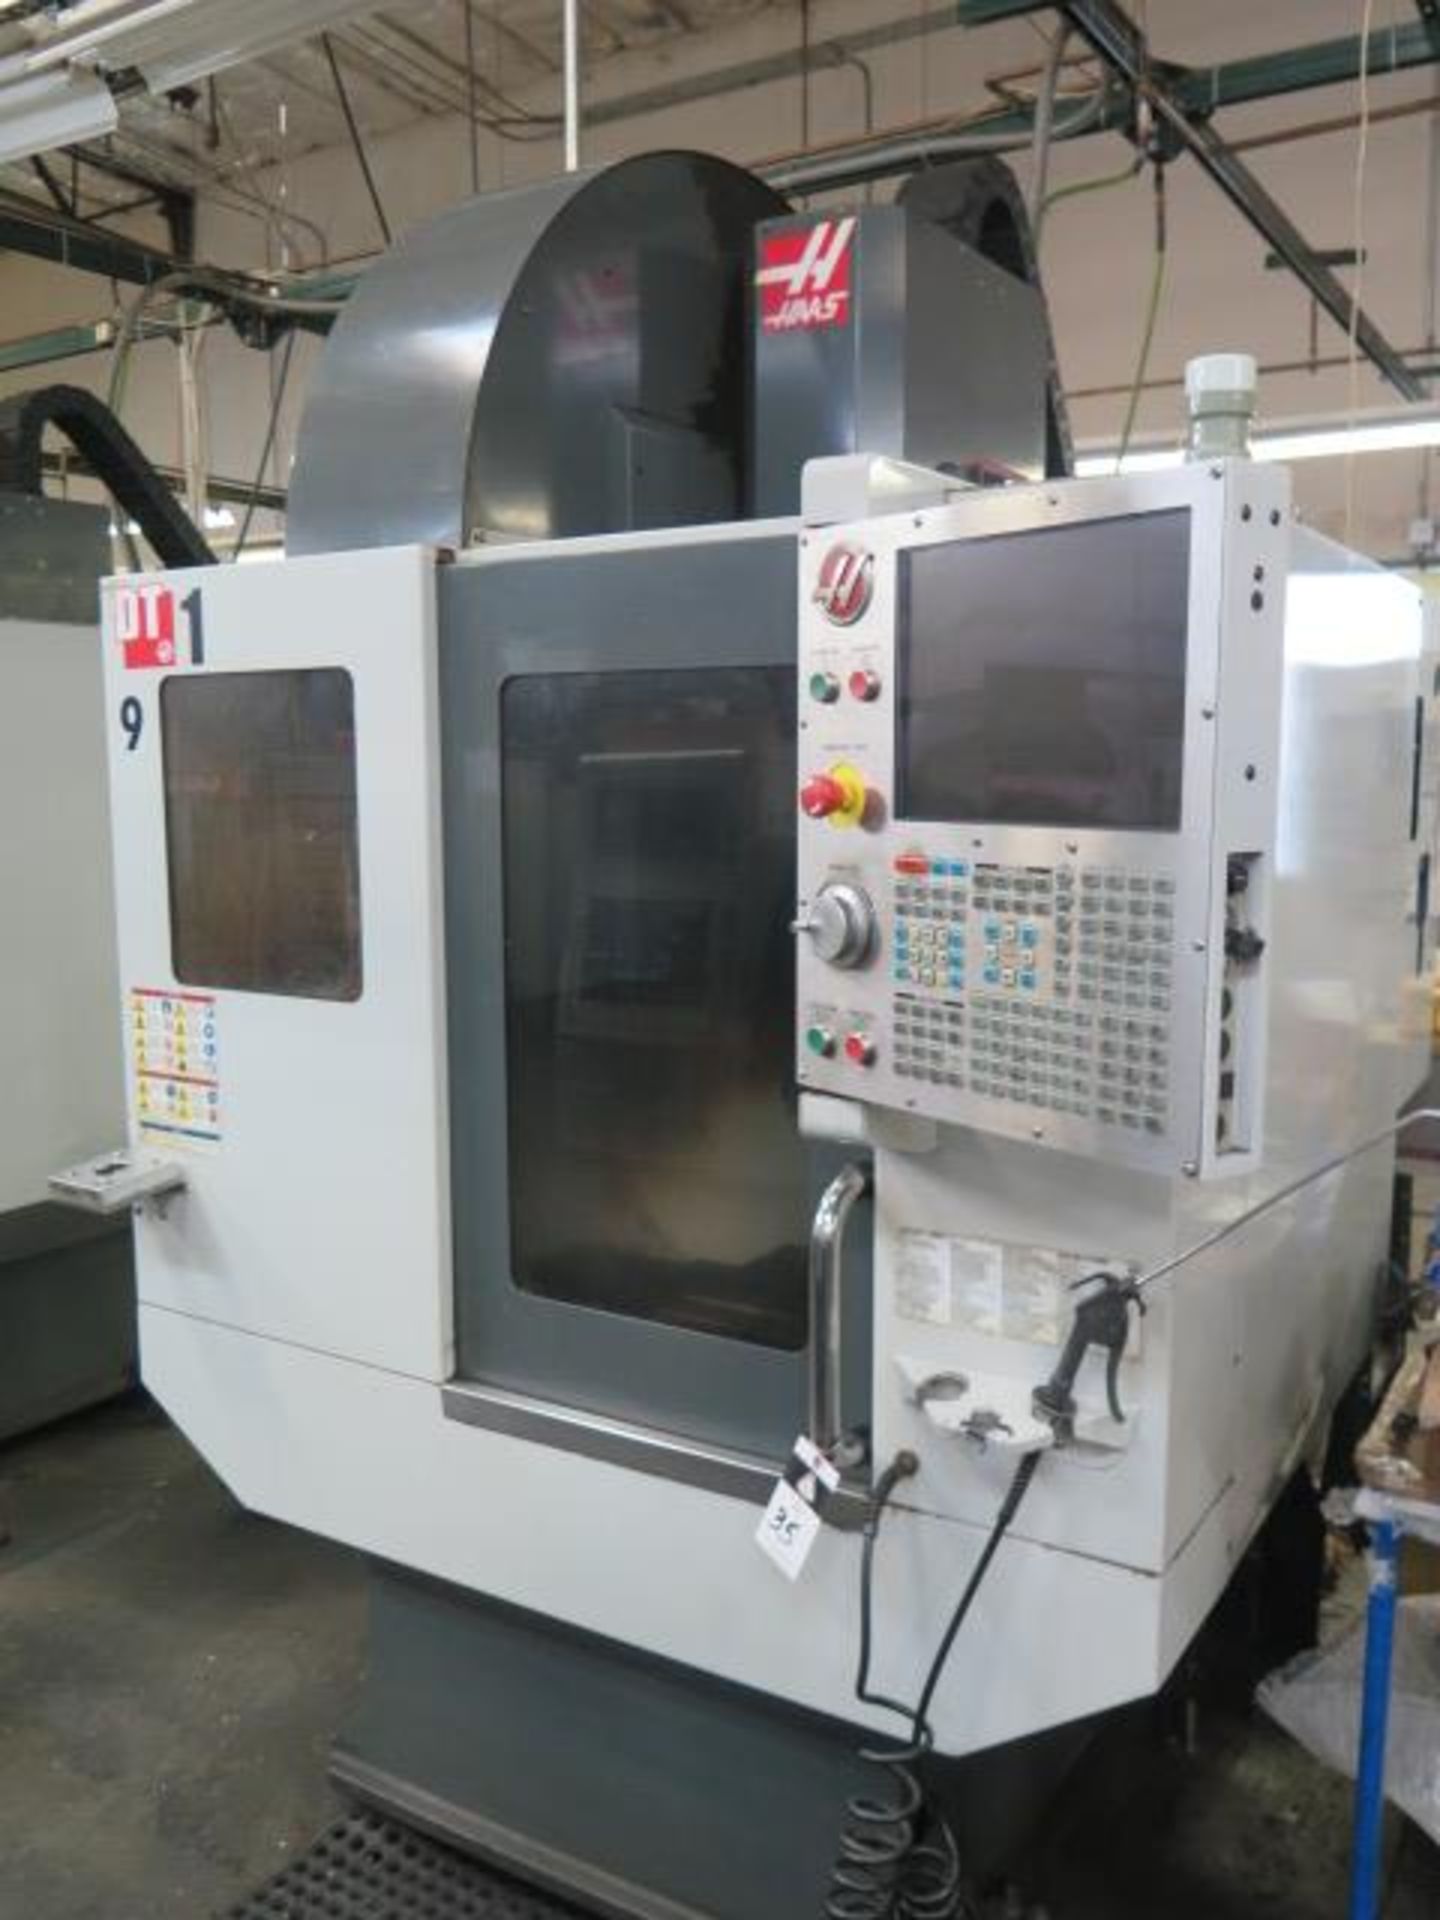 2012 Haas DT-1 4-Axis CNC VMC s/n 1093529 w/ Haas Controls, 20-Station ATC, SOLD AS IS - Image 2 of 13